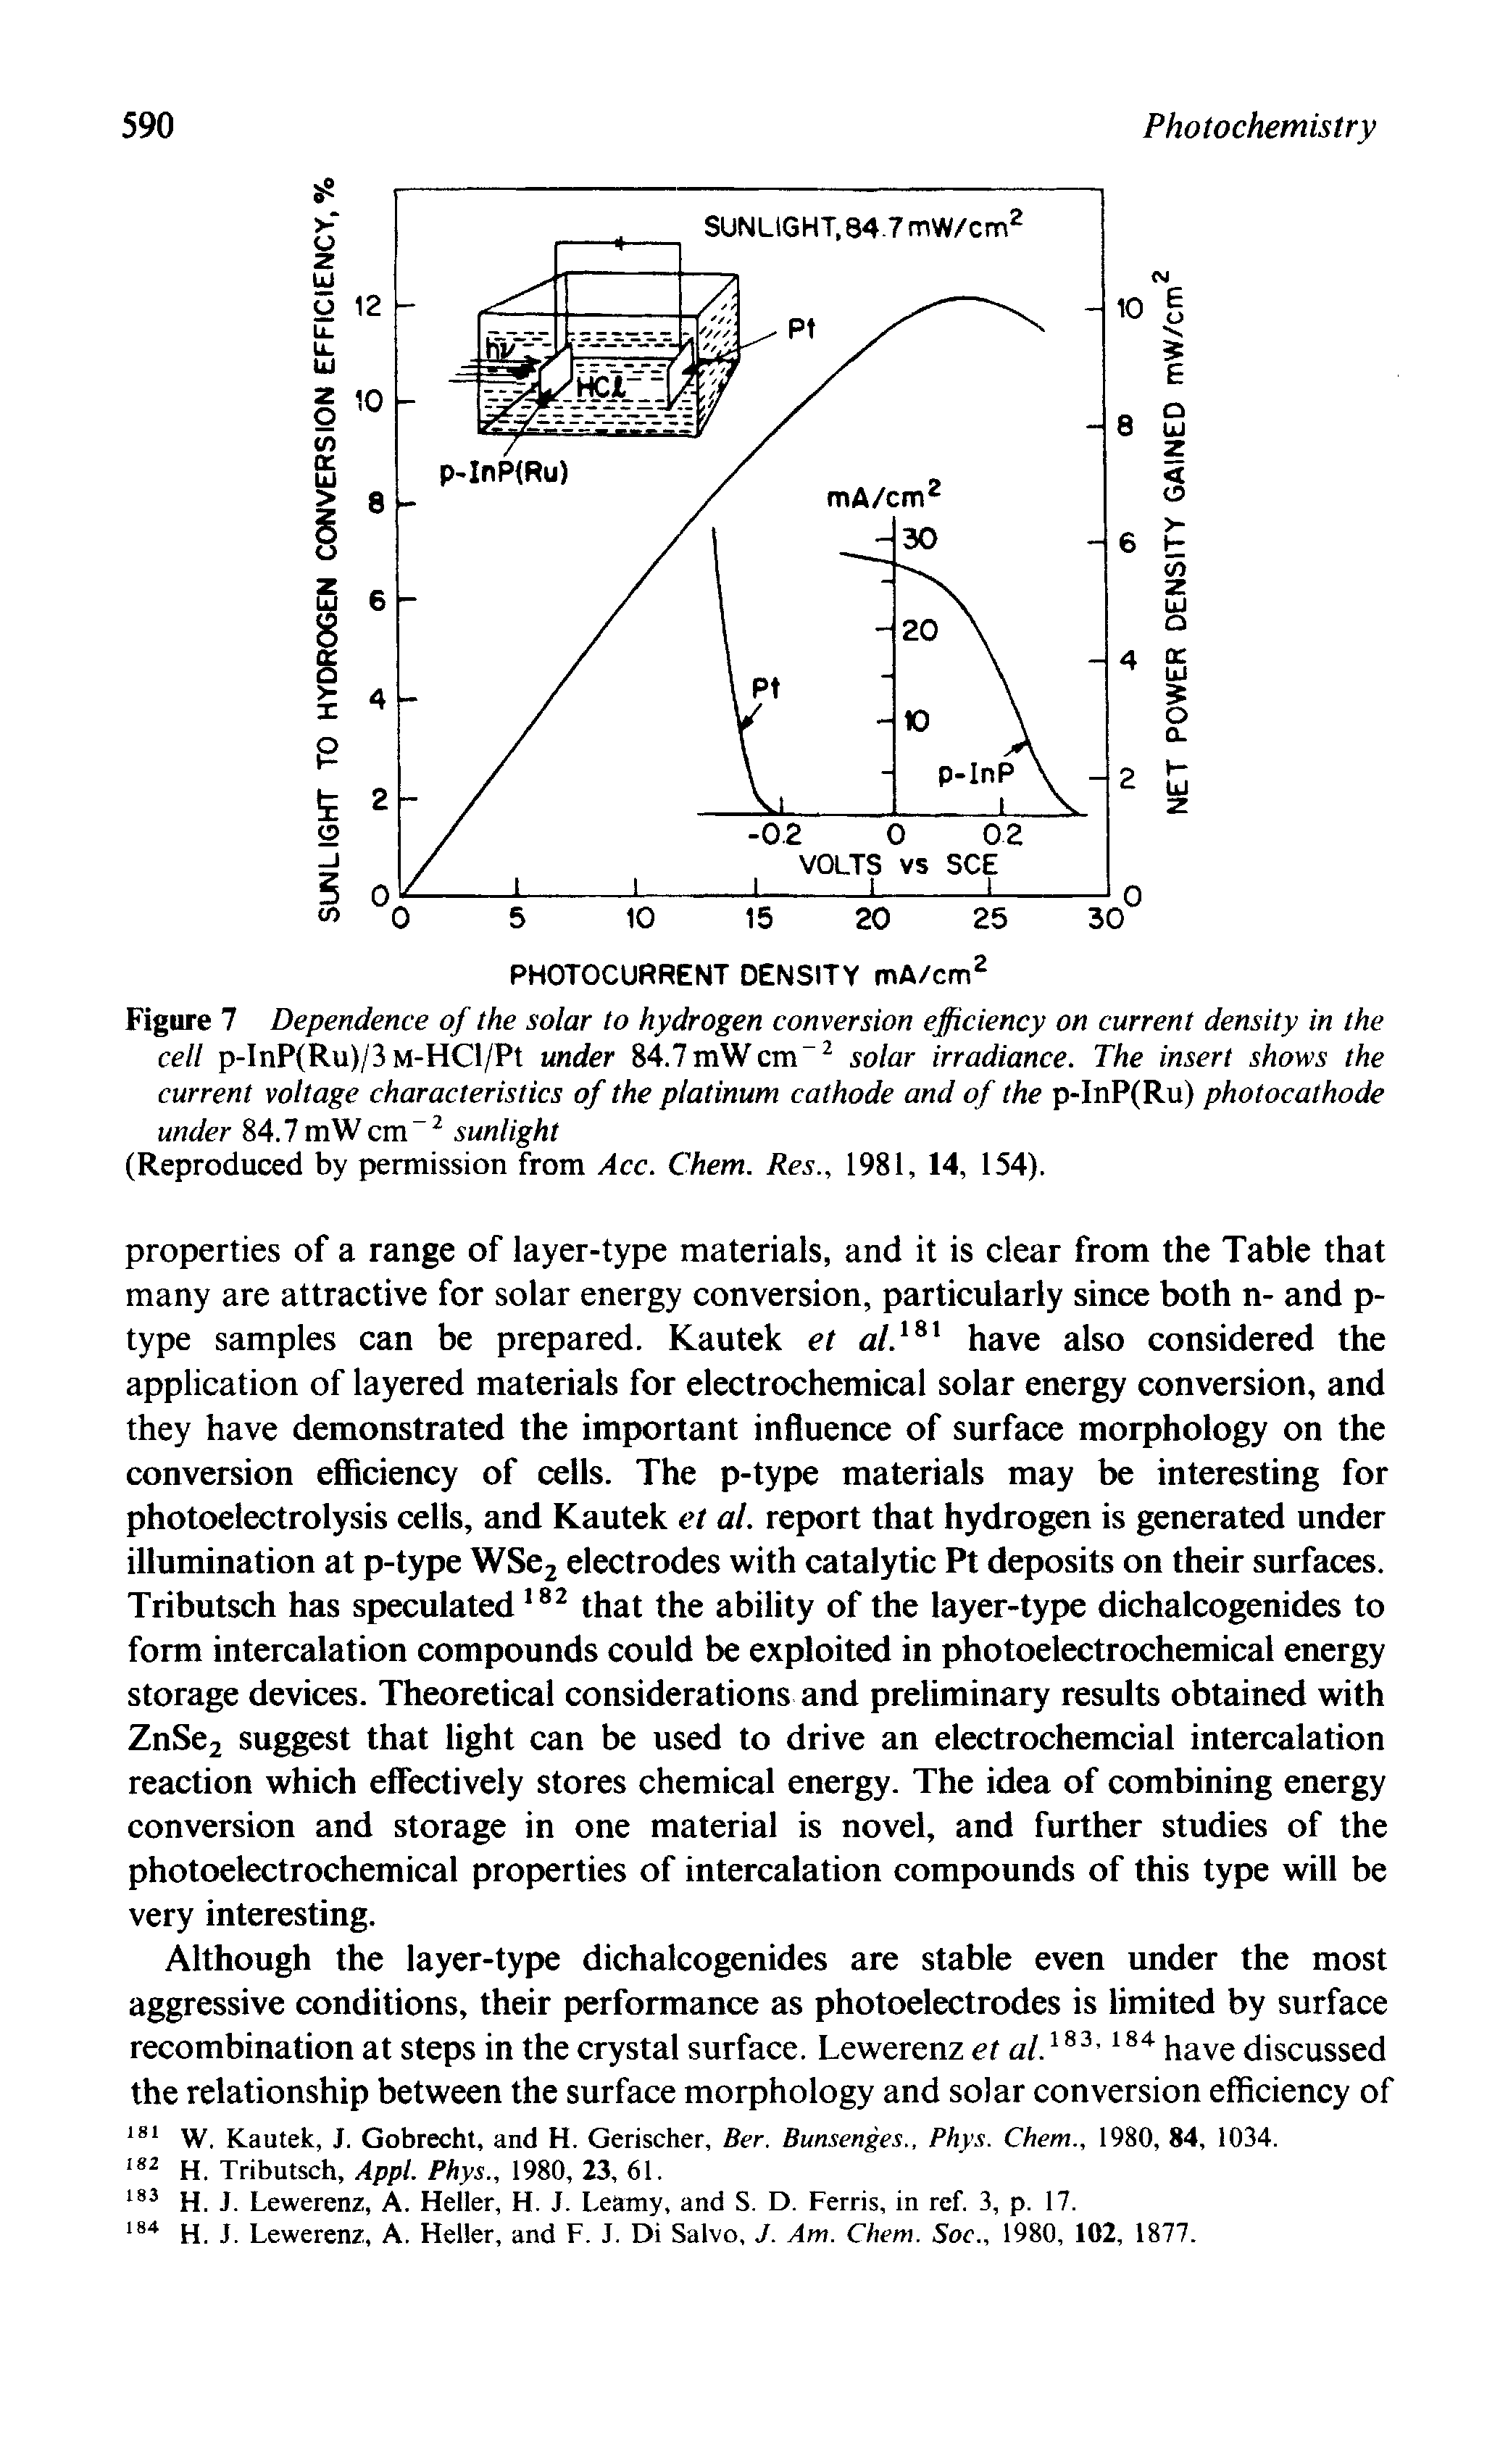 Figure 7 Dependence of the solar to hydrogen conversion efficiency on current density in the cell p-InP(Ru)/3M-HCl/Pt under 84.7mWcm solar irradiance. The insert shows the current voltage characteristics of the platinum cathode and of the p-InP(Ru) photocathode under 84.7 mW cm sunlight...